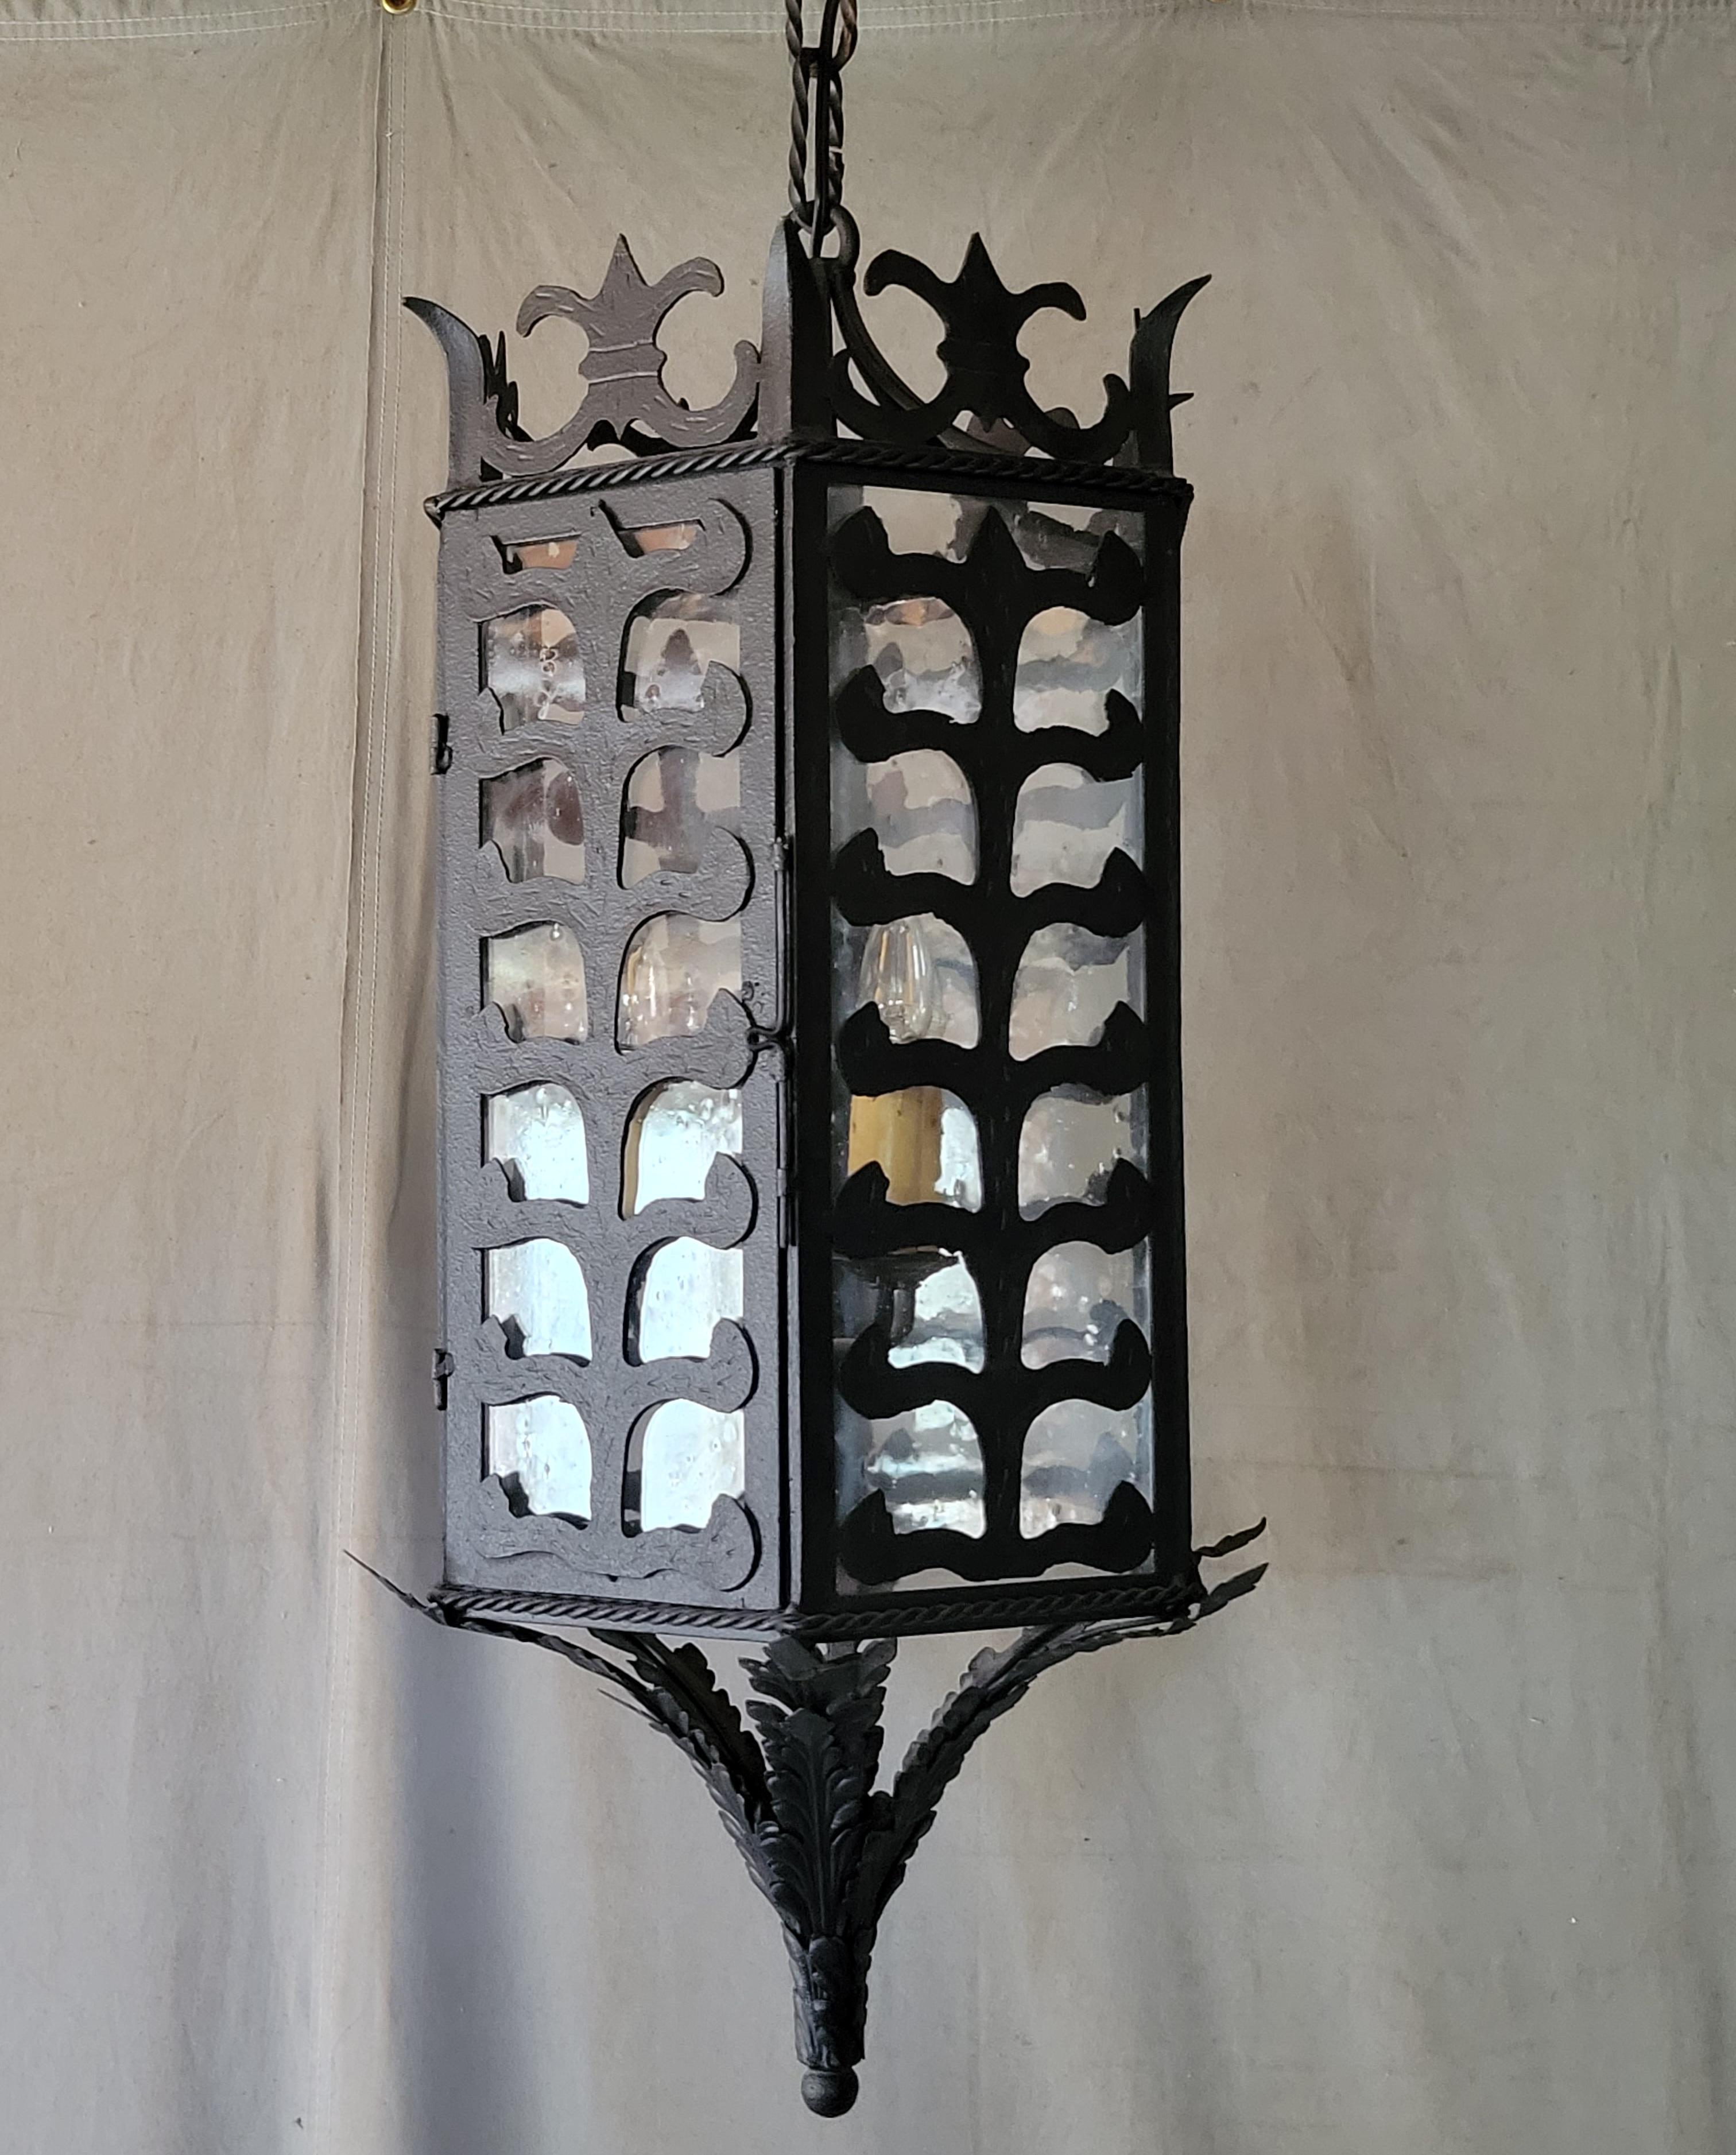 A gorgeous vintage custom hexagonal black iron & glass pendant lantern with 3 flame light bulbs.  Each of the six sides is made up of glass panels and decorative ironwork designs. Glass contains bubbles and irregularities to give it an antique look.